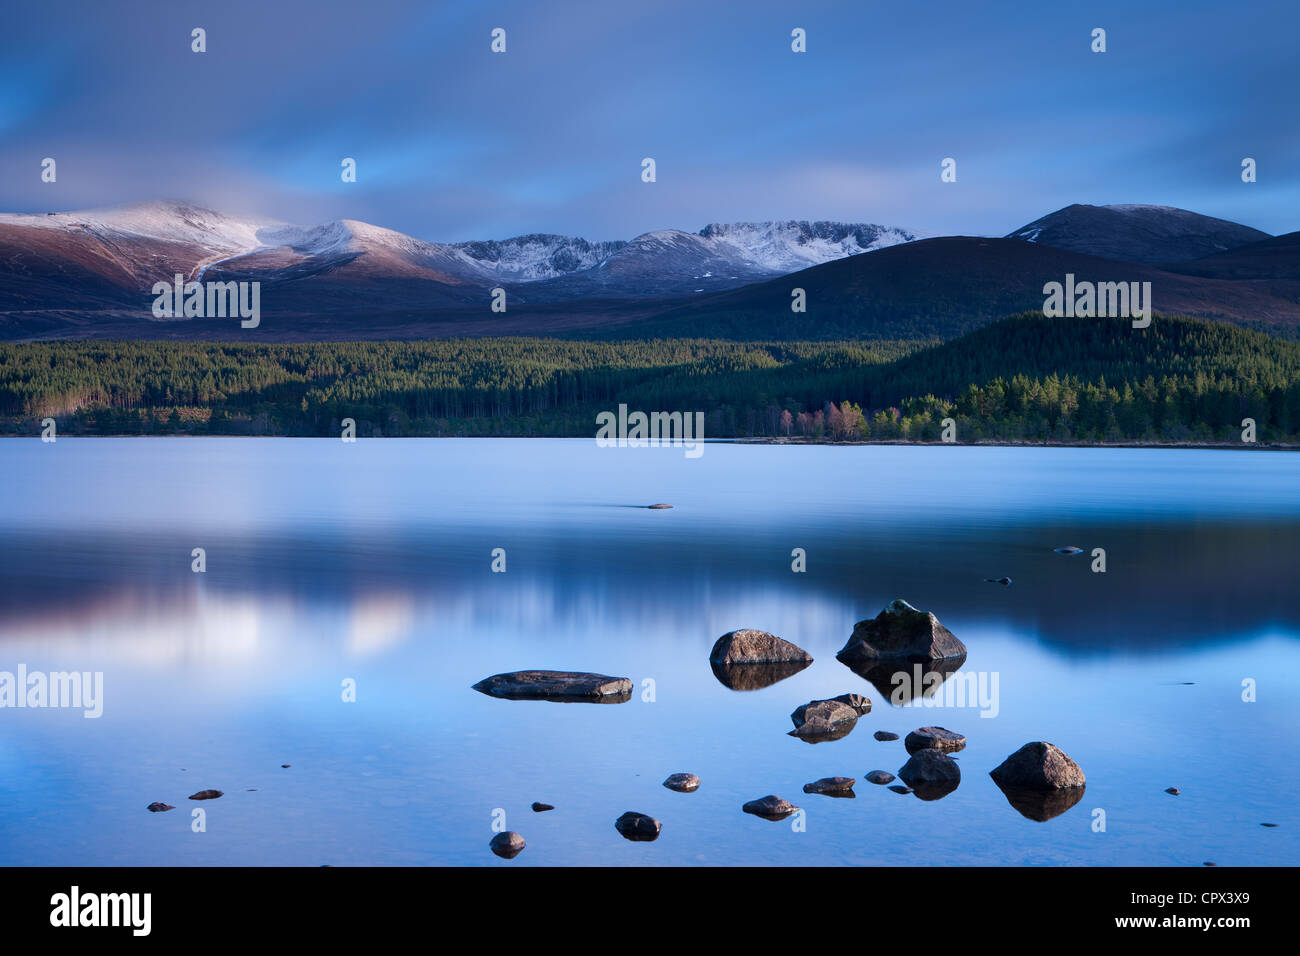 Loch Morlich & the Cairngorm Mountains, Cairngorms National Park, Badenoch and Strathspey, Scotland Stock Photo